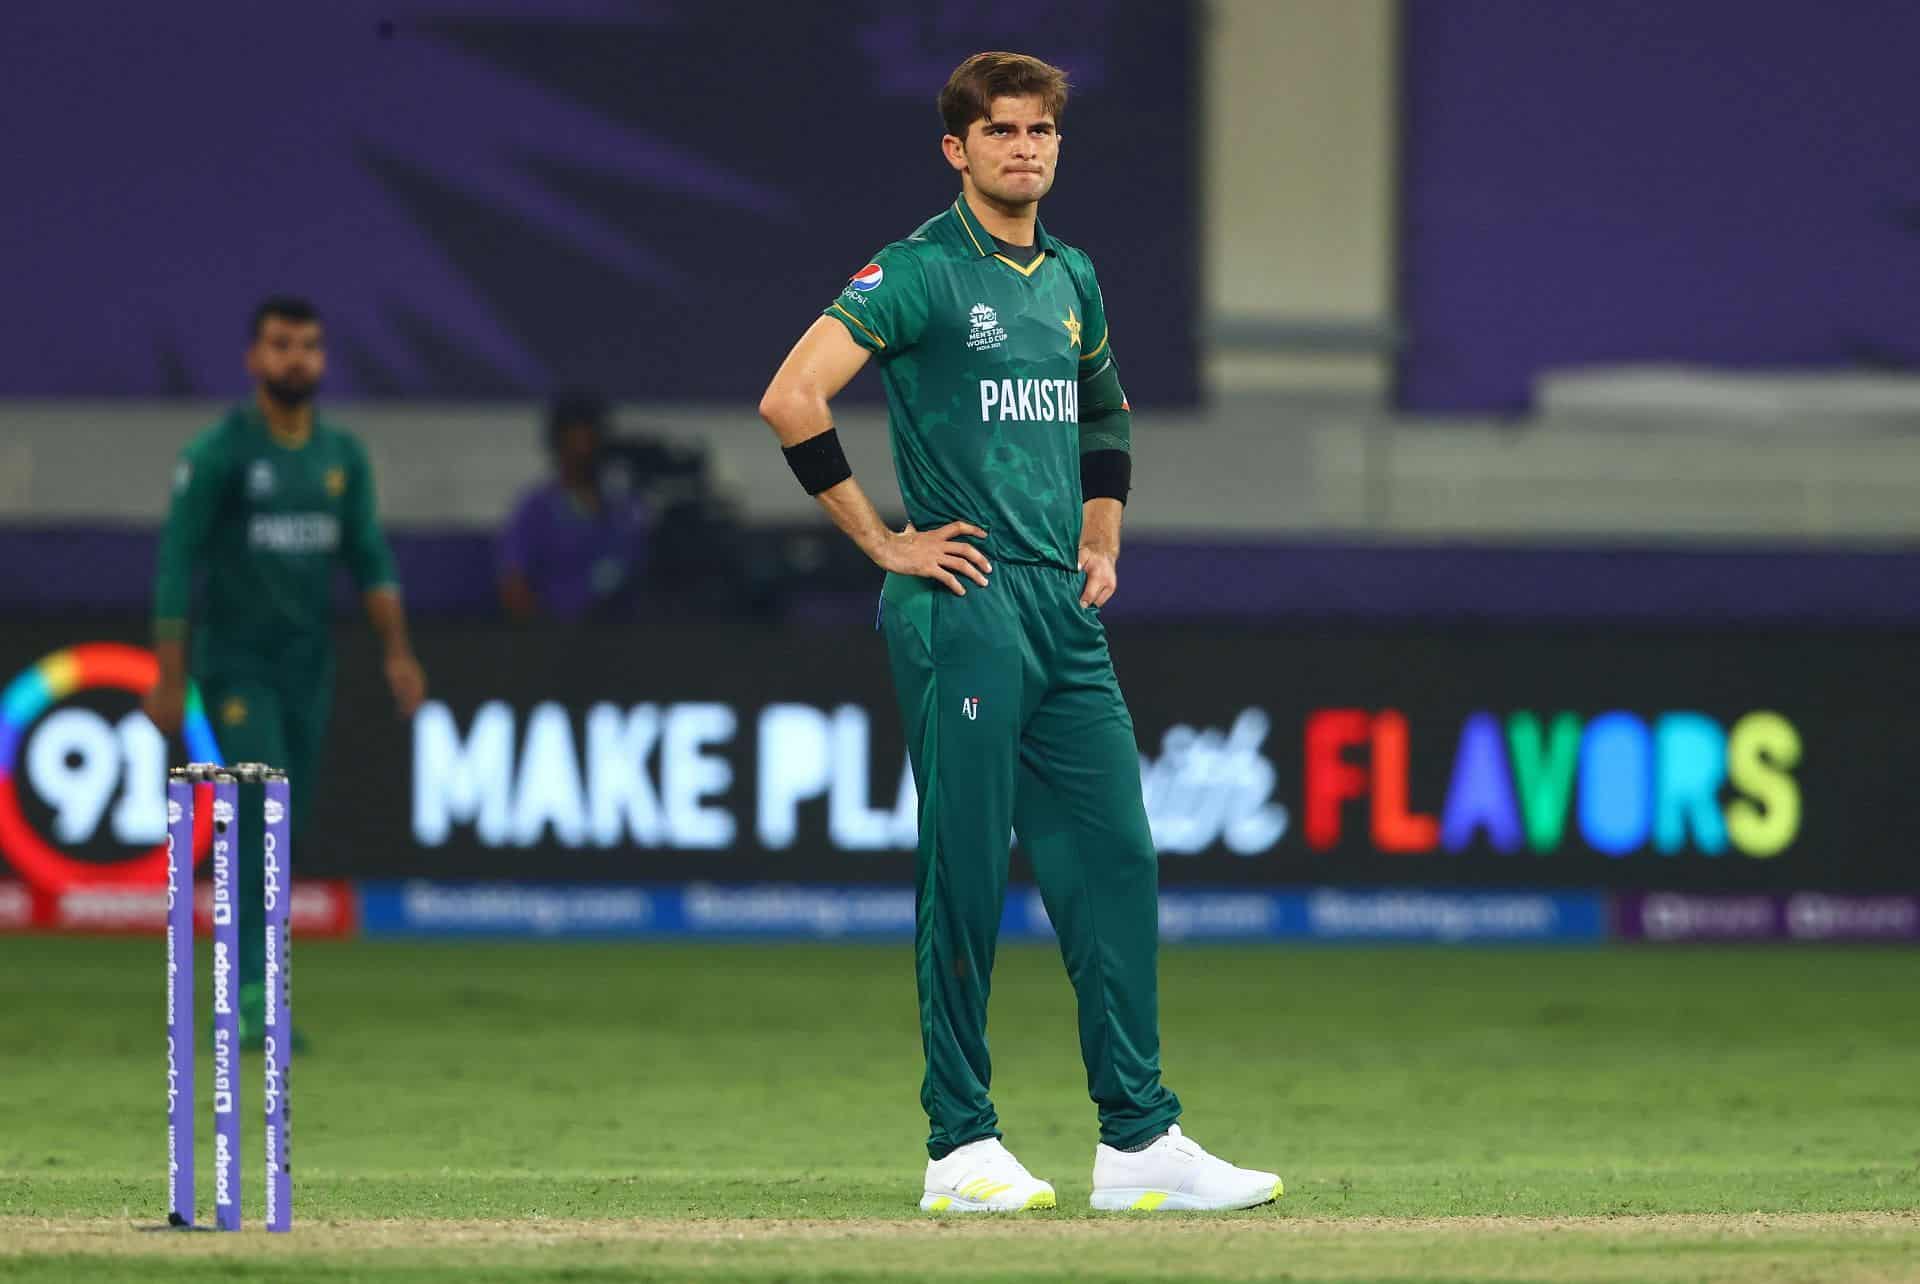 Why Shaheen Afridi is not playing?